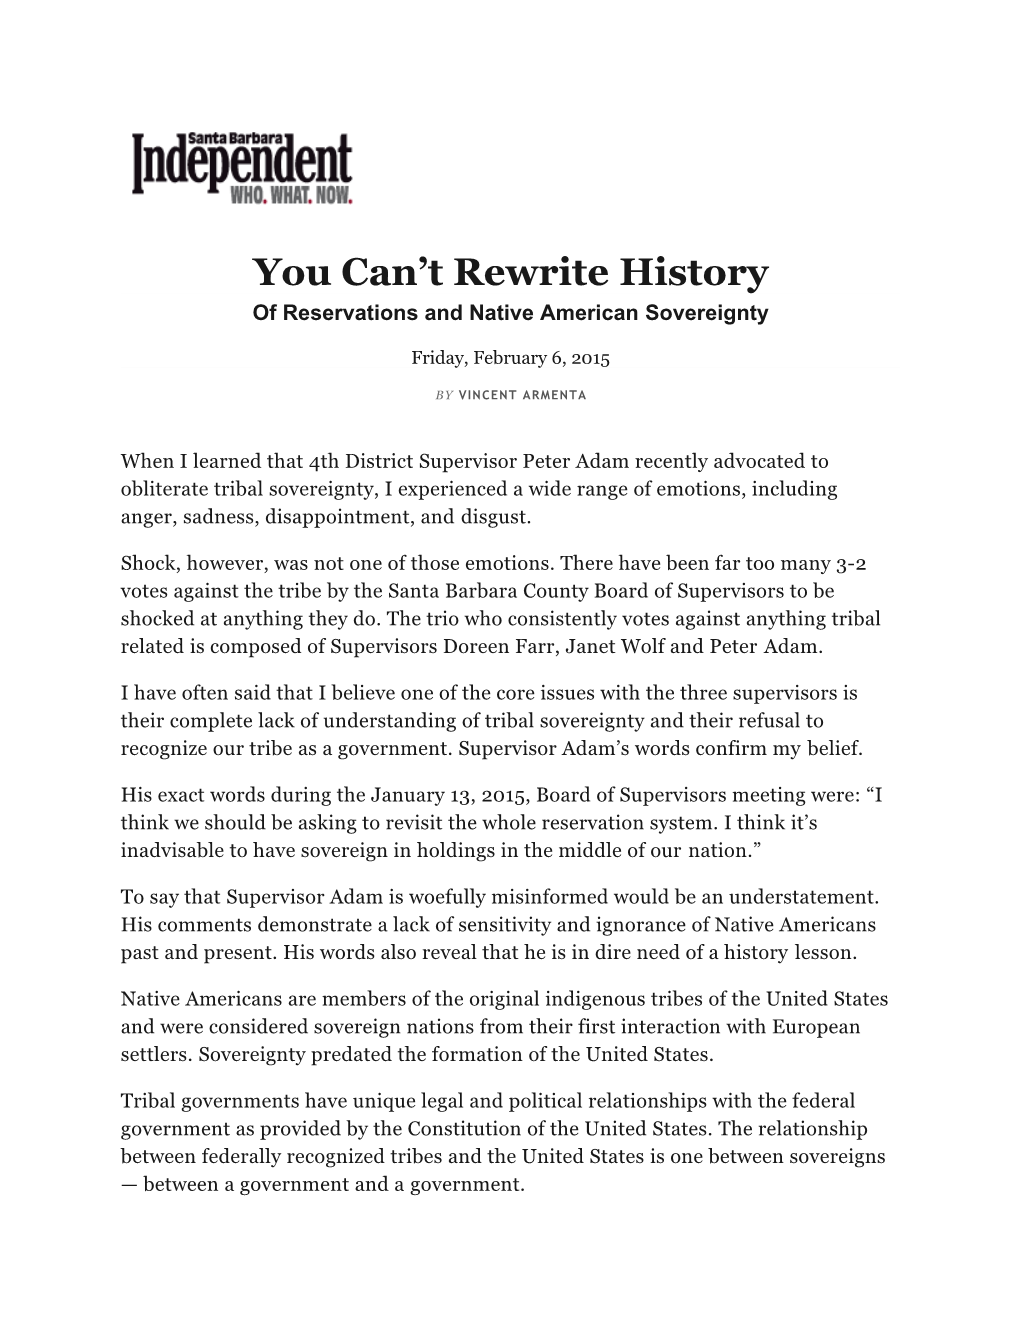 Of Reservations and Native Americansovereignty